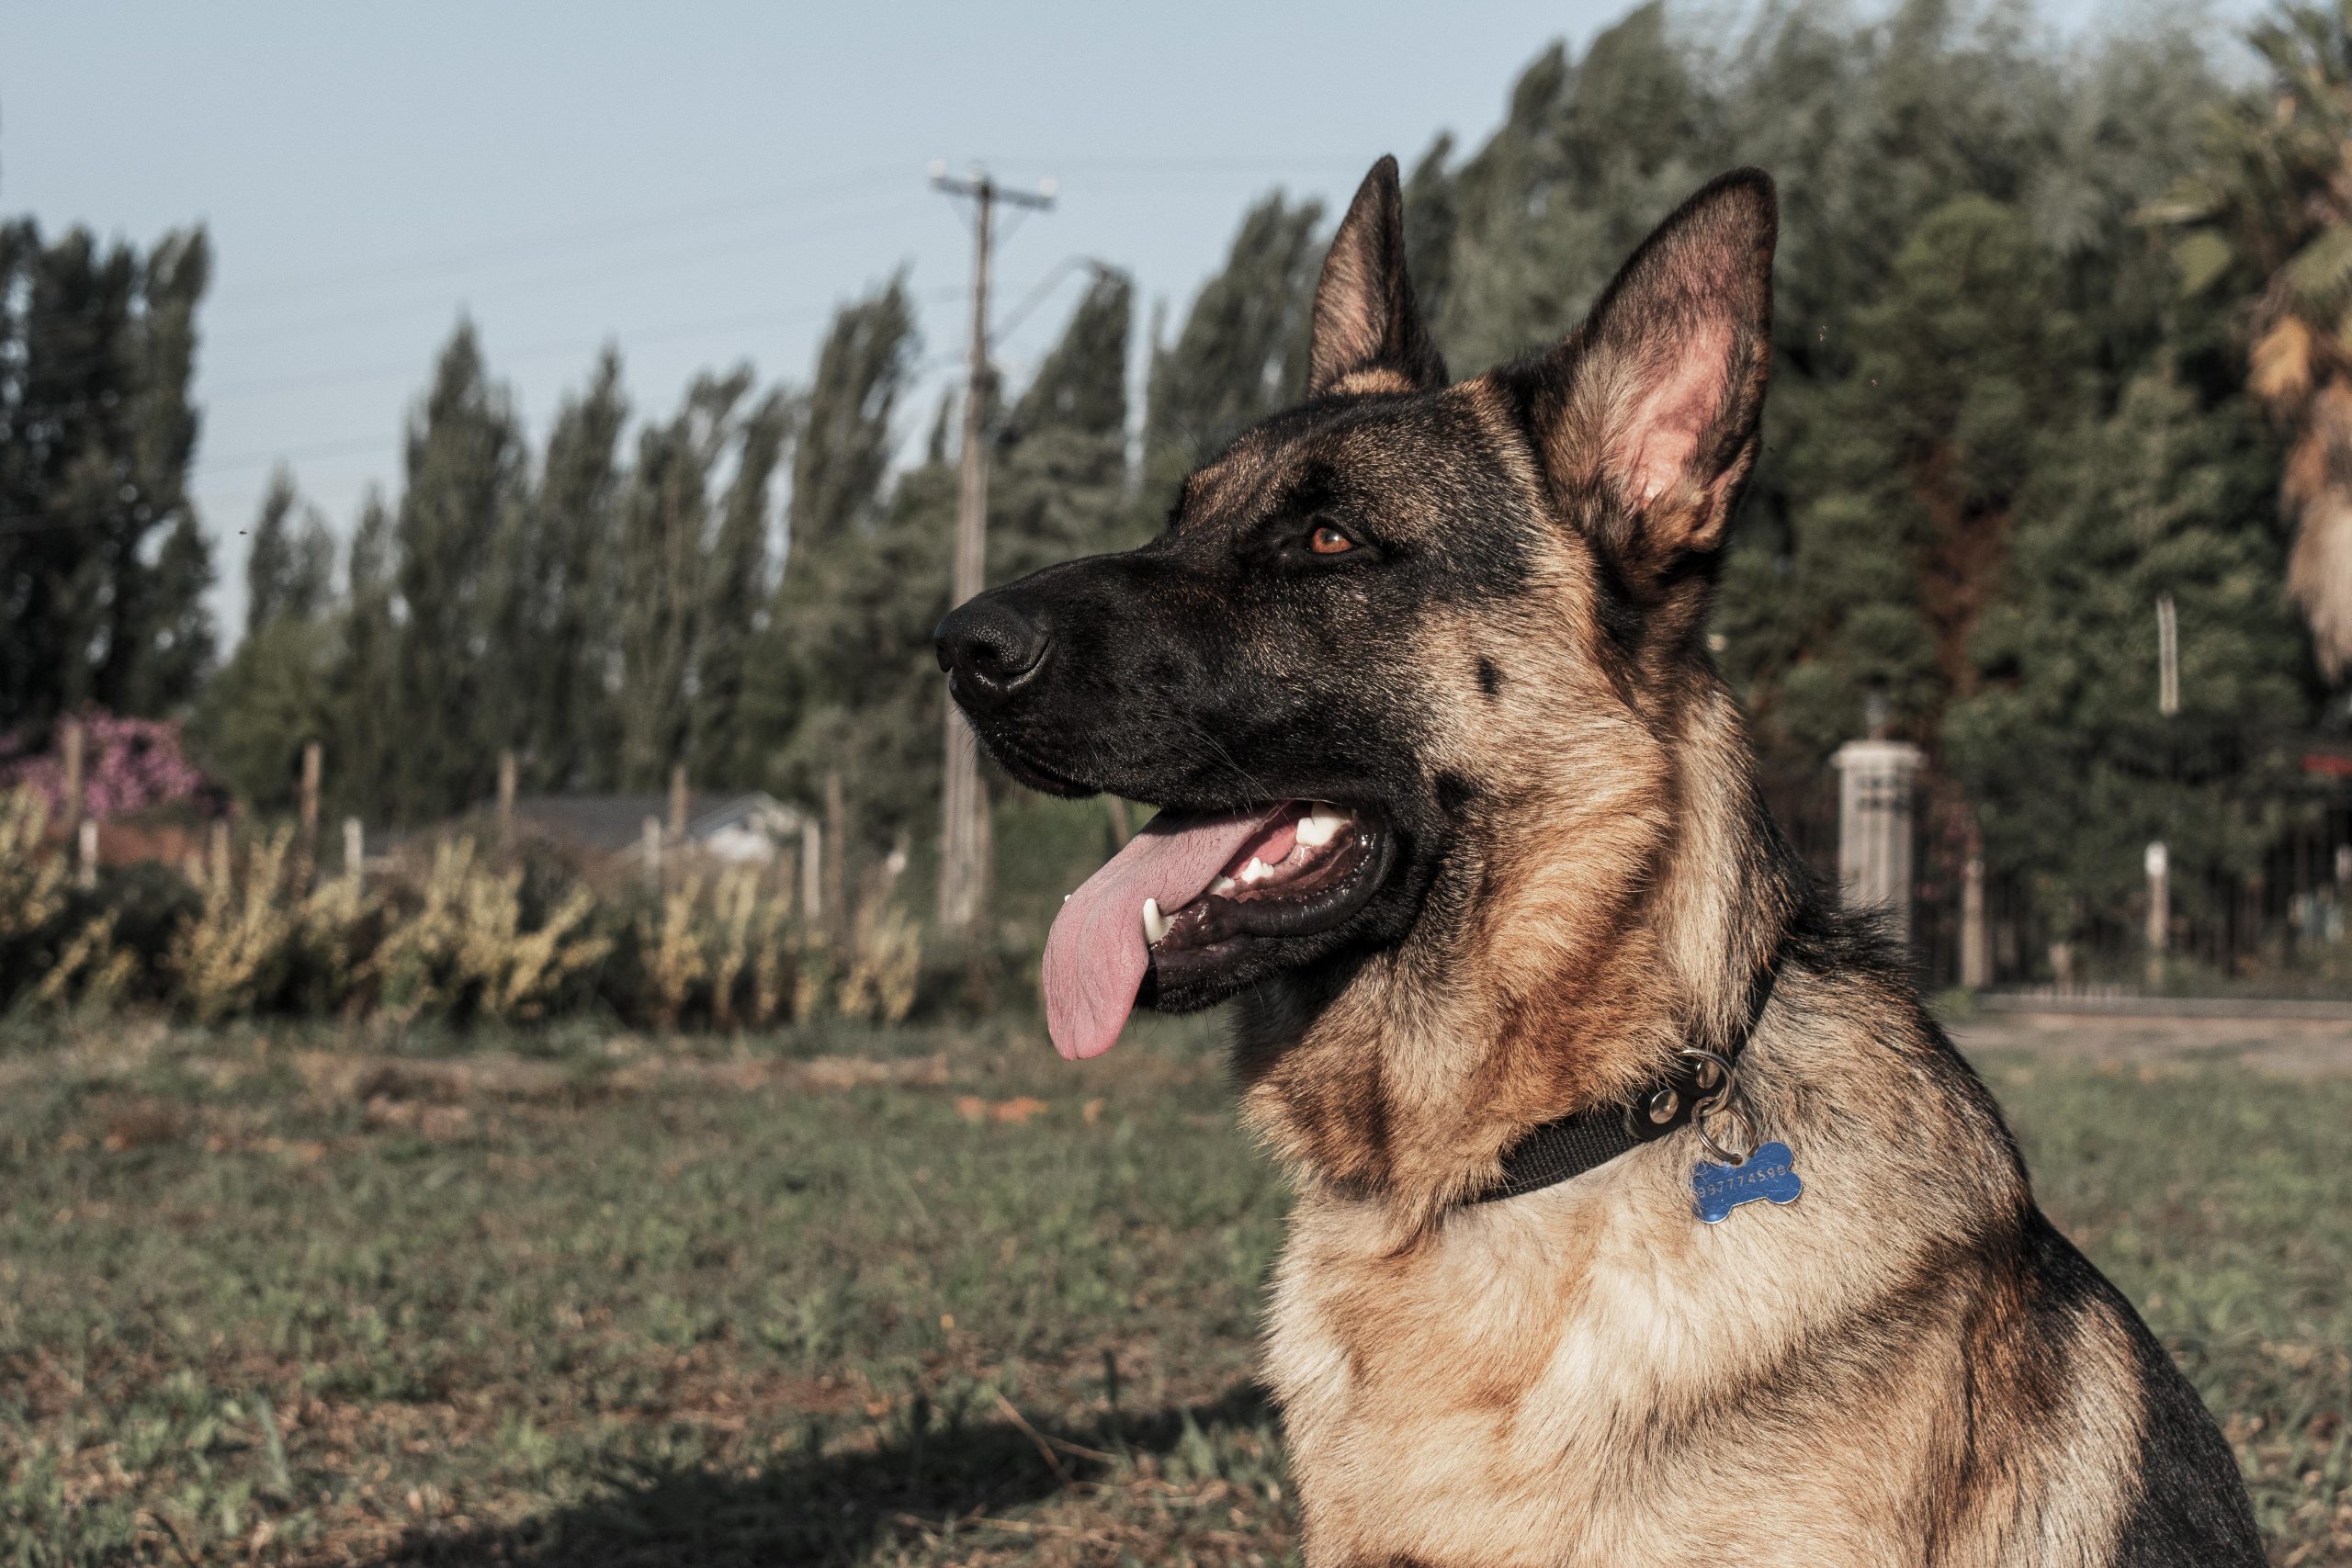 what is the best wireless fence for dogs